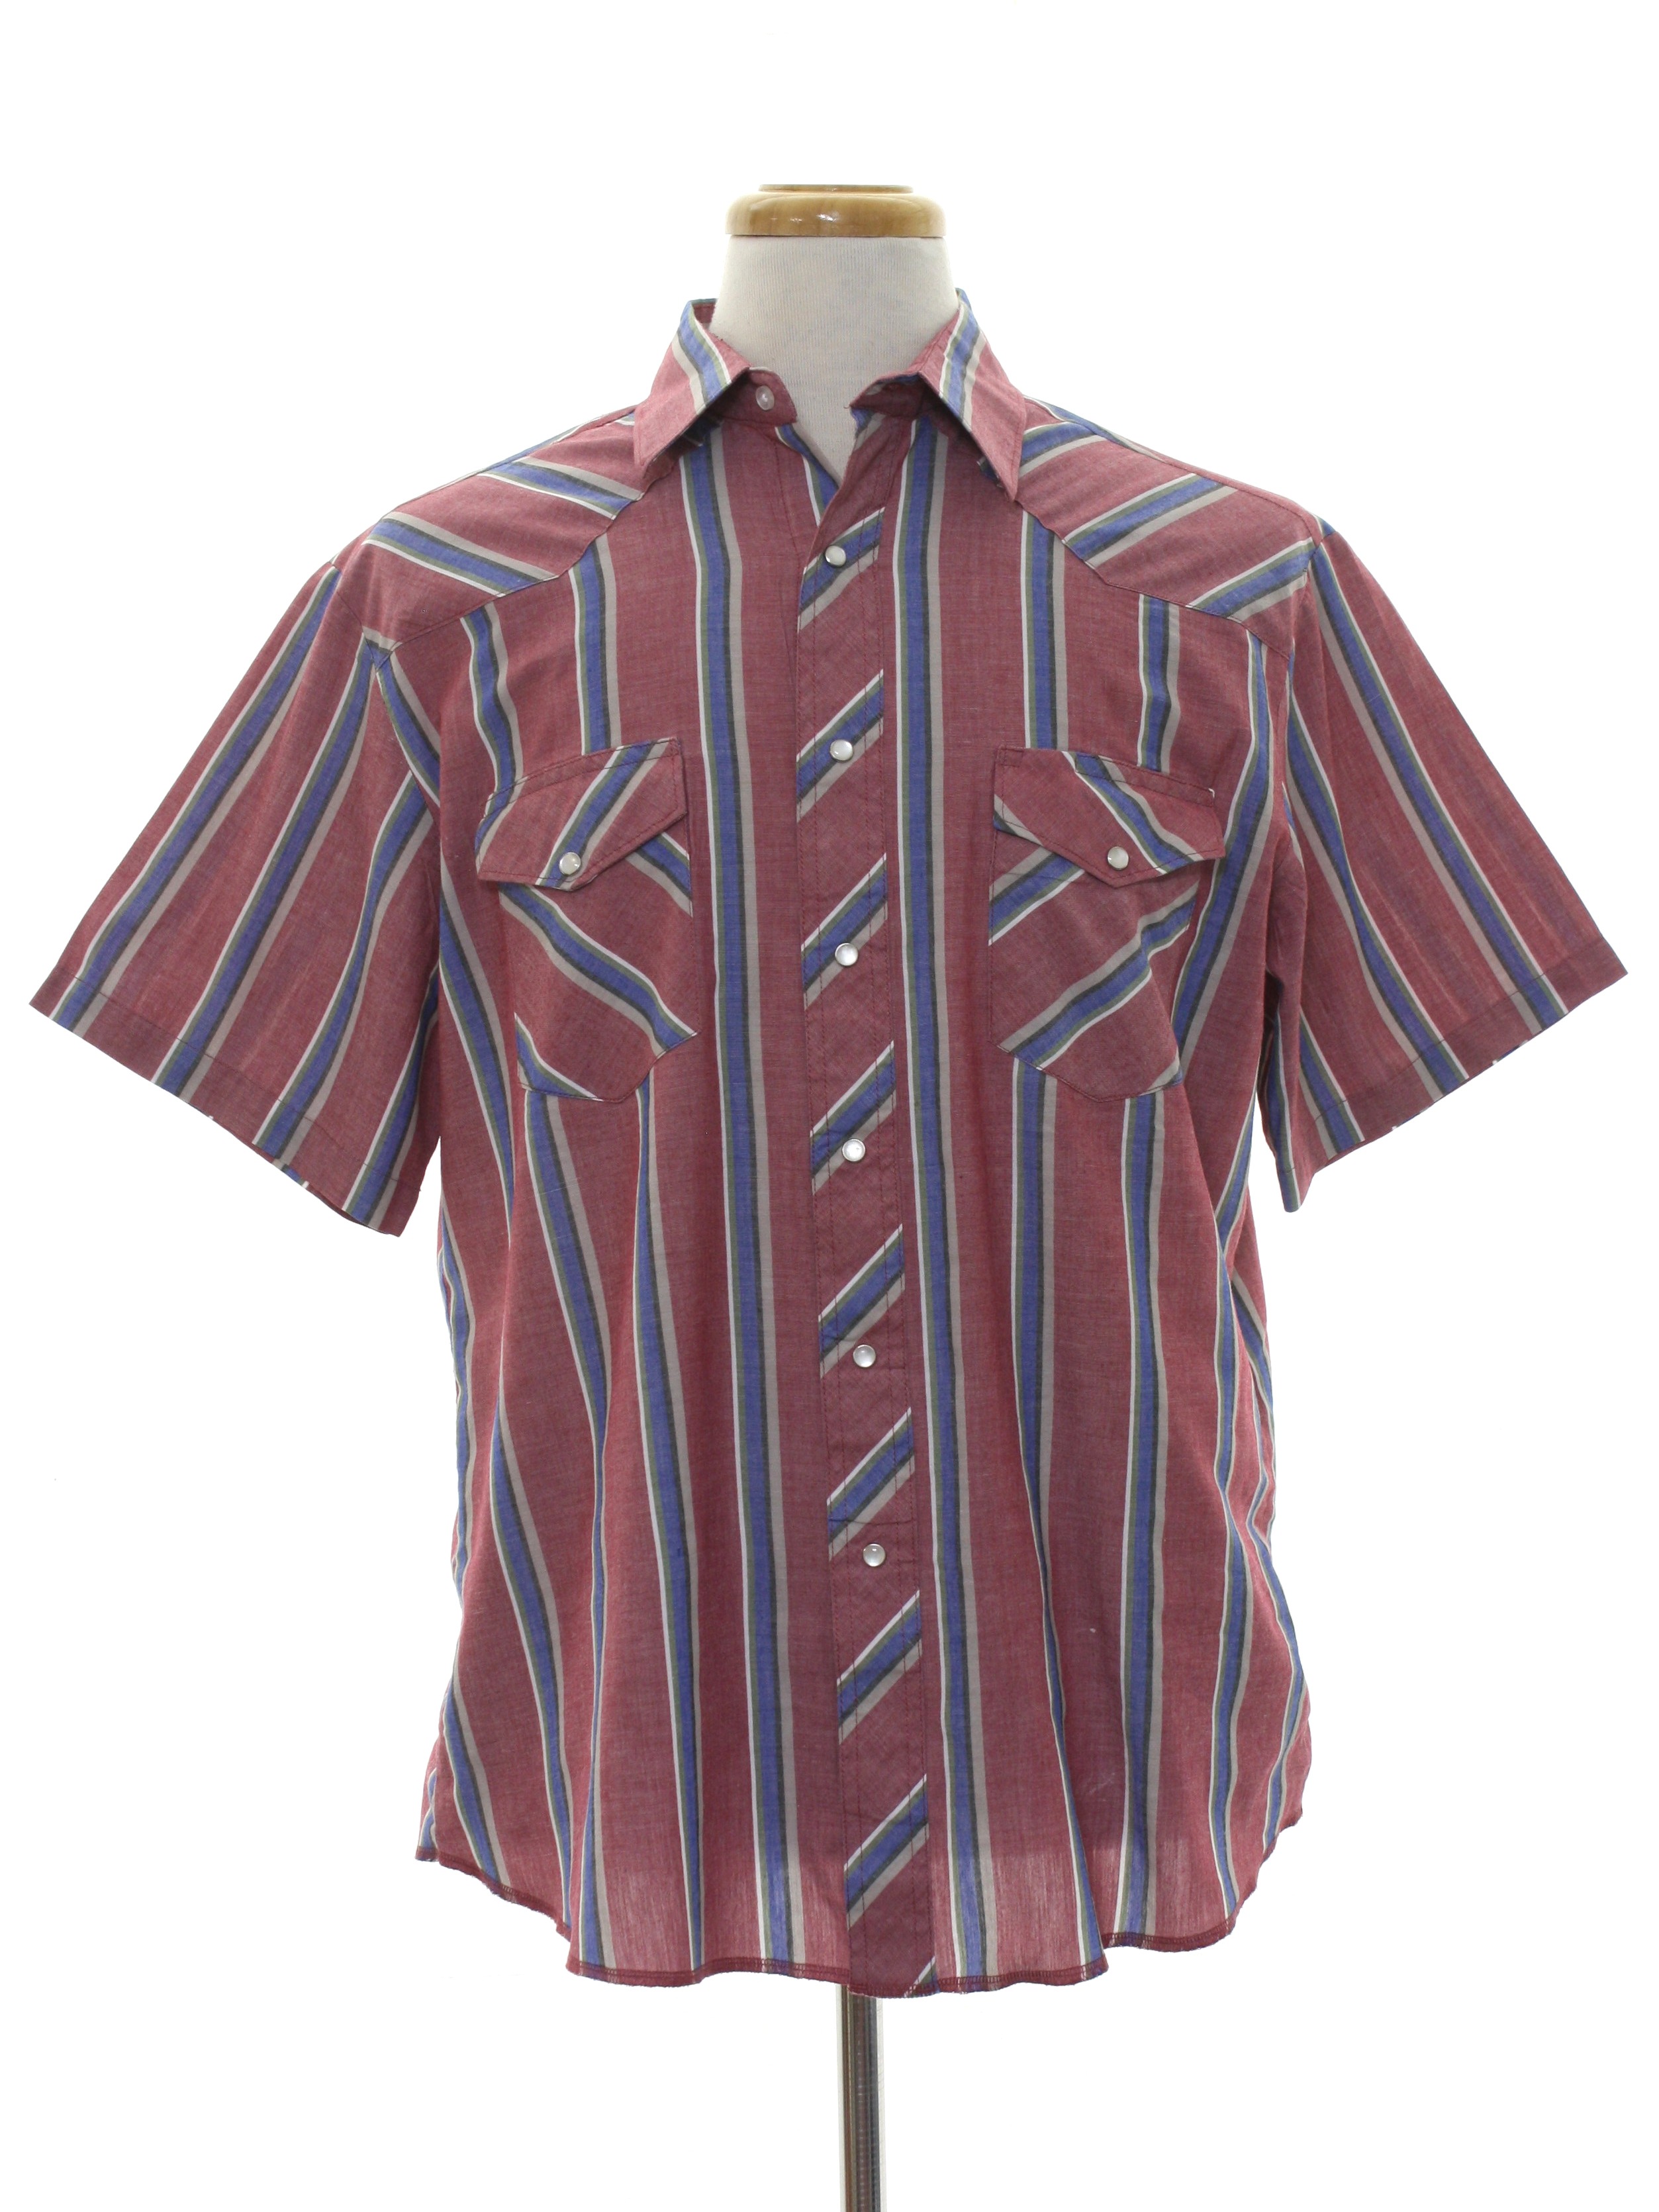 1990's Vintage Wrangler Western Shirt: 90s -Wrangler- Mens faded red with  thin striped design in shades of white, sage green, blue, black, and tan  background cotton polyester blend short sleeve western shirt.